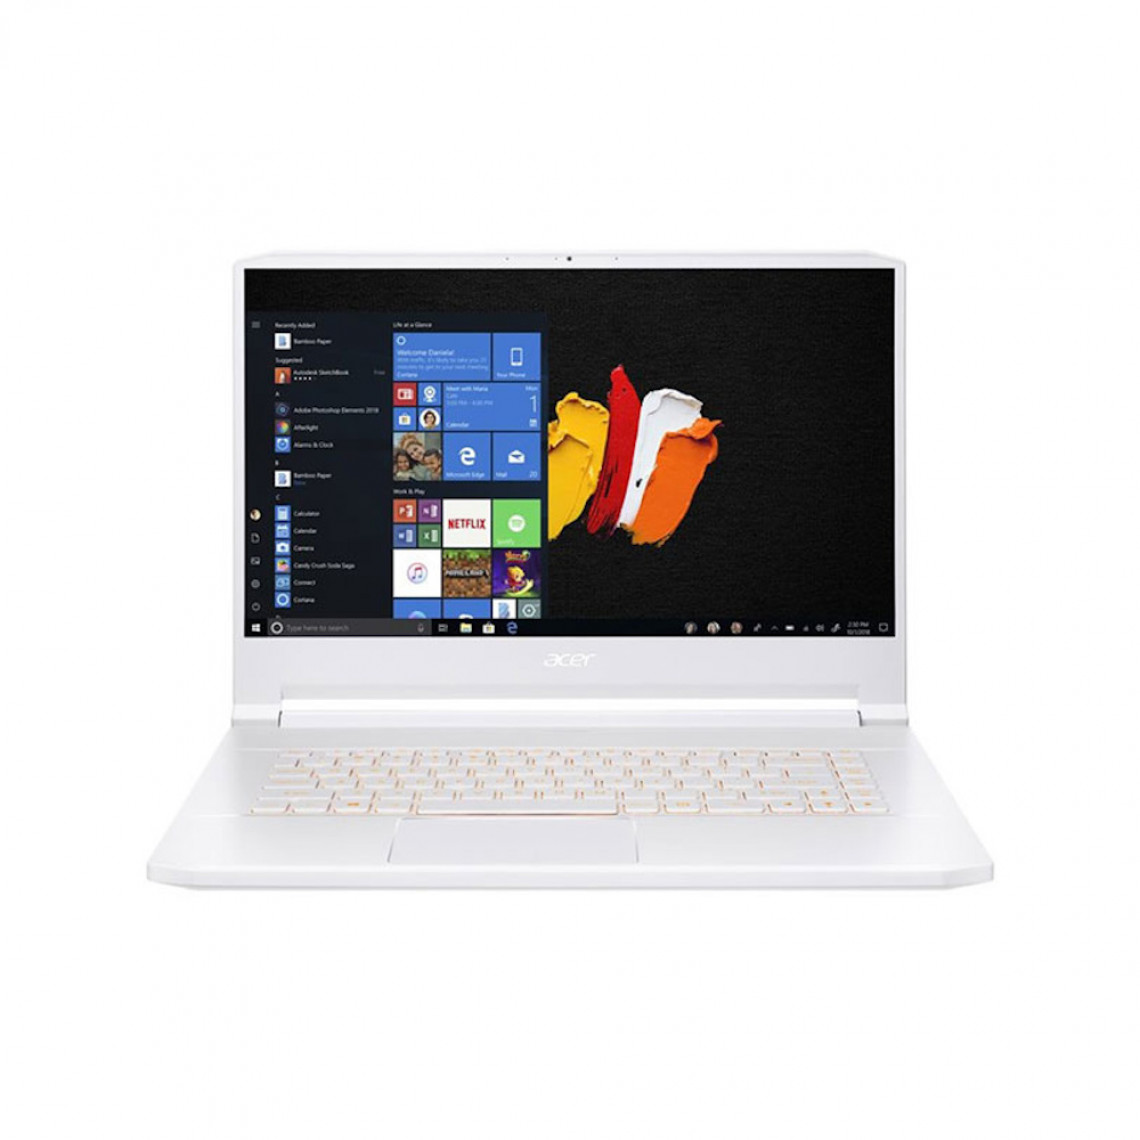 Acer - PC ACER CONCEPTD 7 CN751-51 Intel Core i7-9750H - 16 Go DDR4 512 Go SSD GeForce RTX 2080 15.6'' UHD IPS CLAV FR - WIN10 Pro - PC Portable